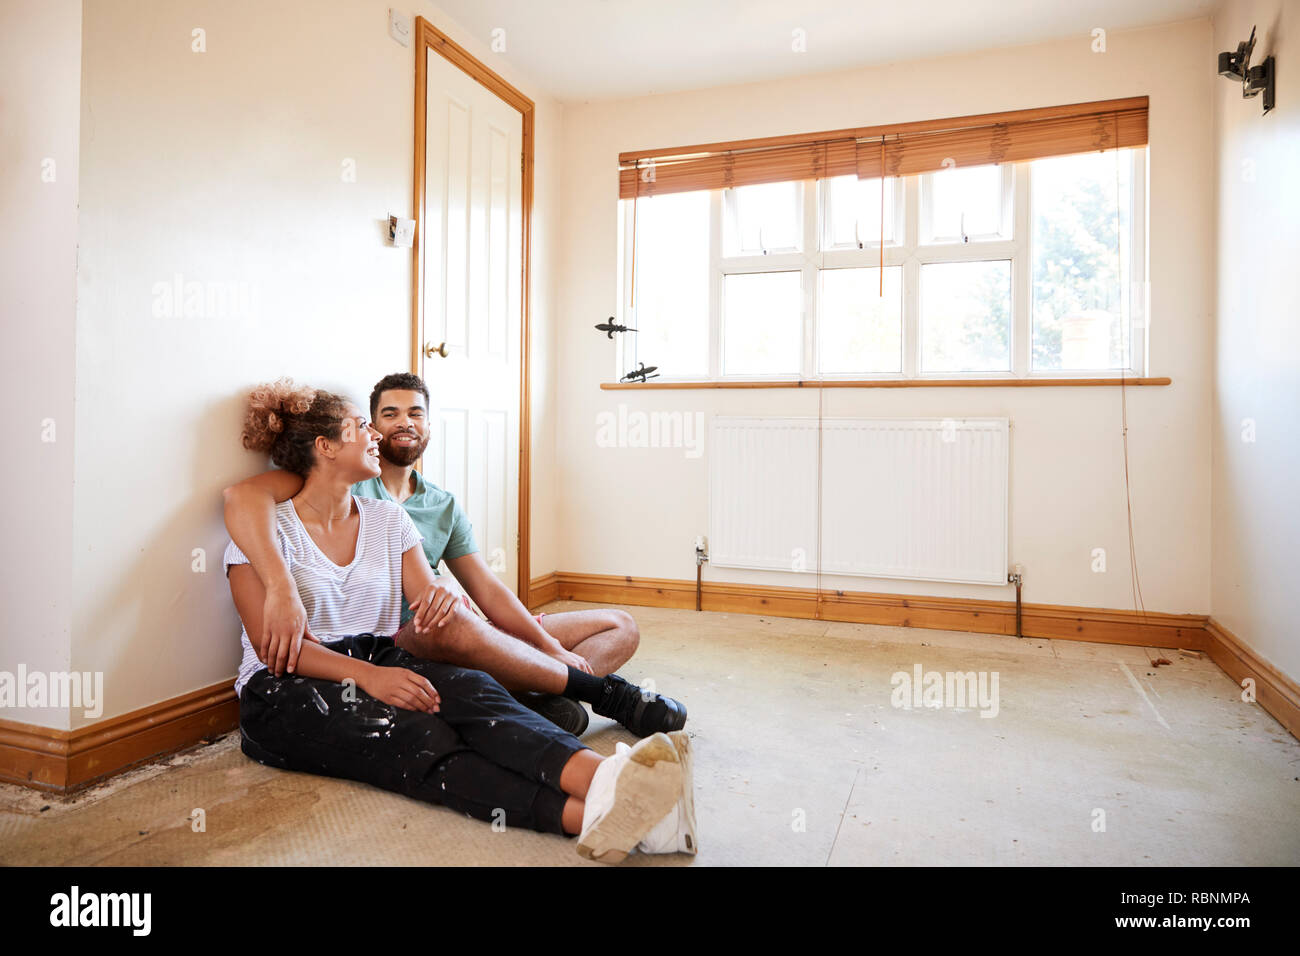 Couple Sitting On Floor In Empty Room Of New Home Planning Design Stock Photo